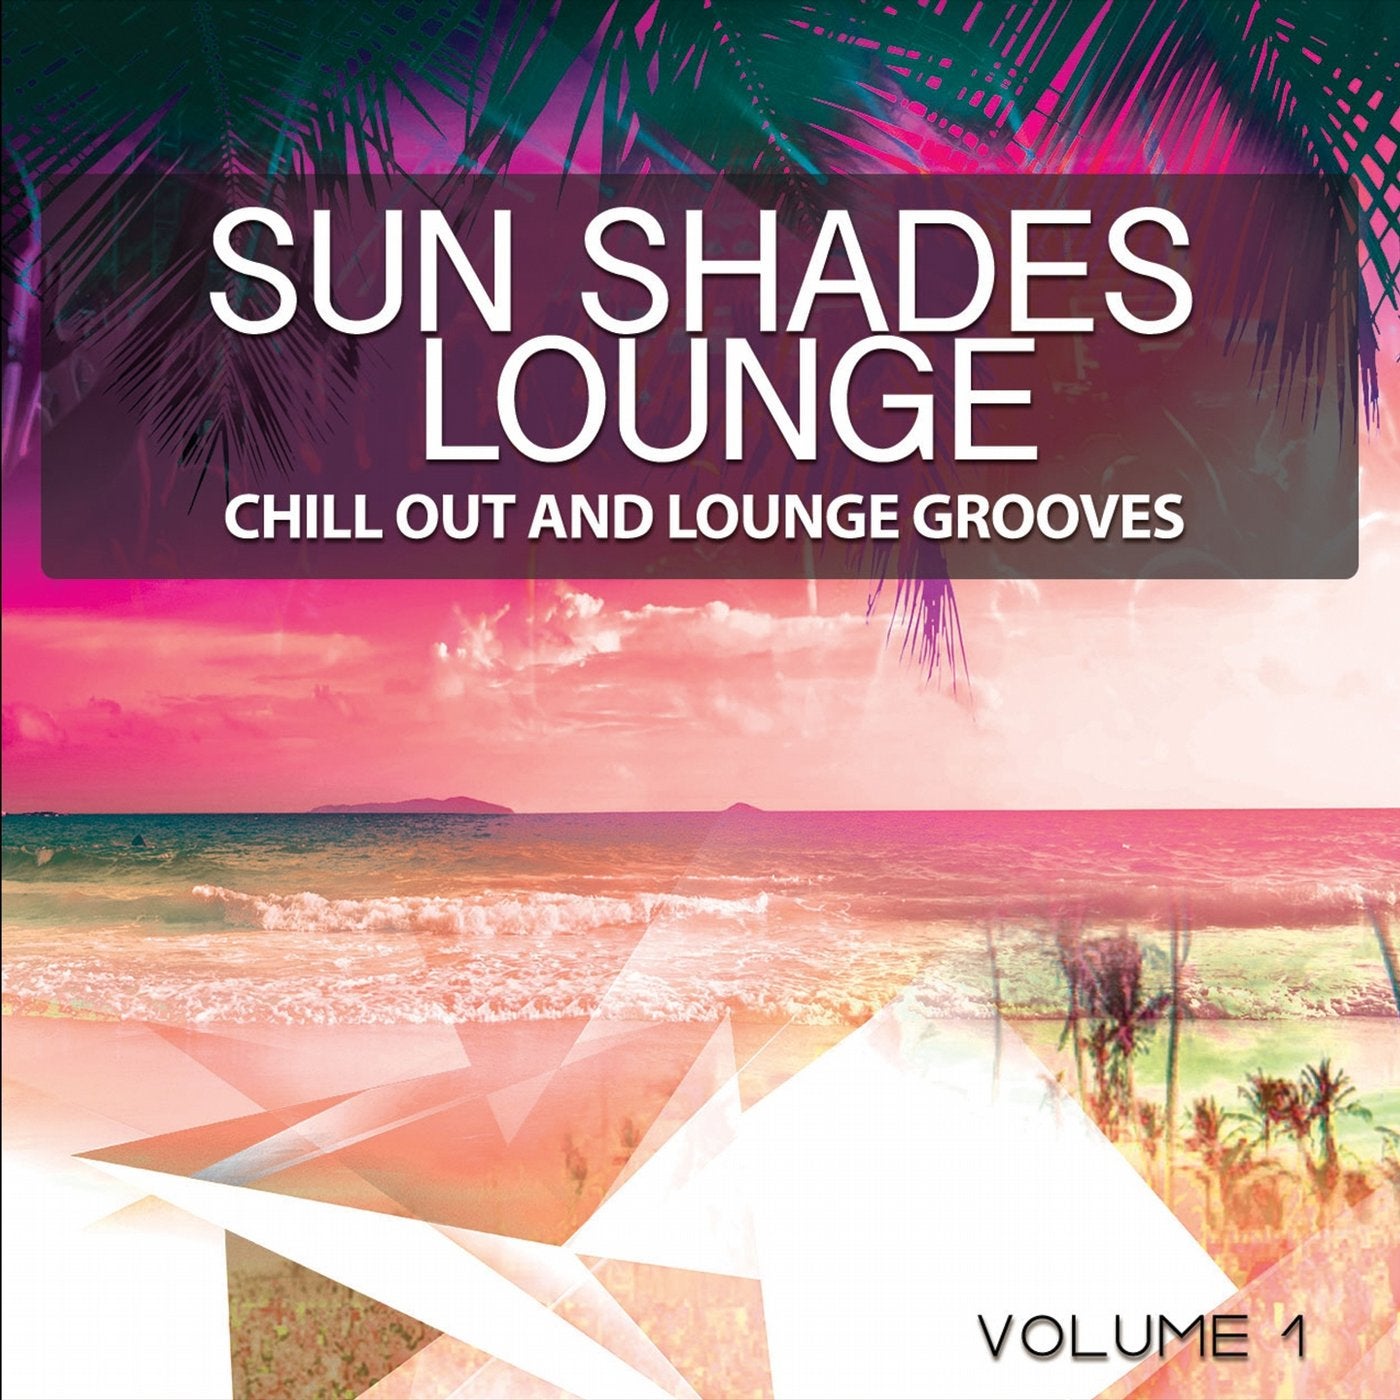 Sun Shades Lounge, Vol. 1 (Chill out & Lounge Grooves)